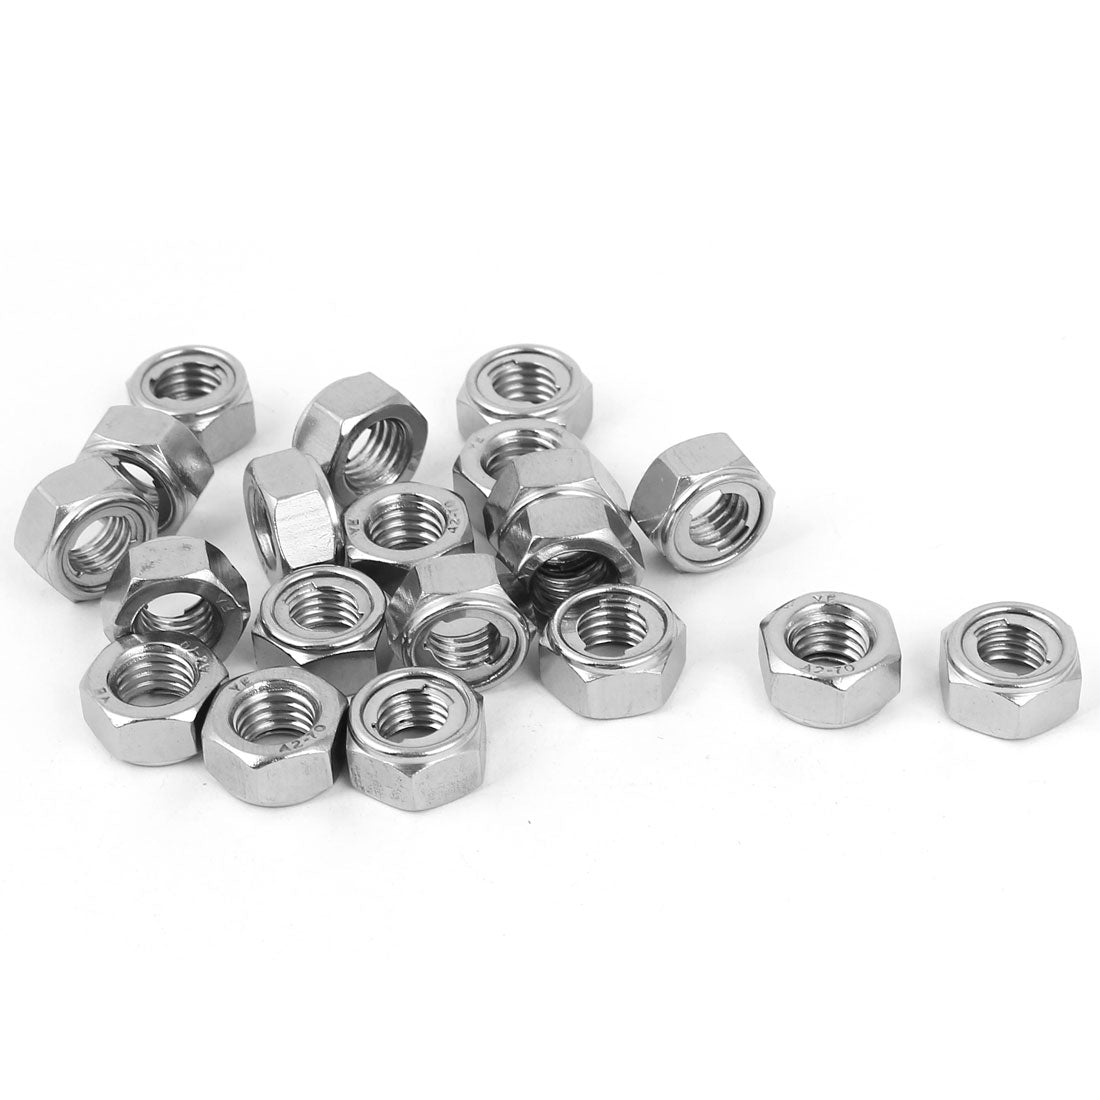 uxcell Uxcell M8 304 Stainless Steel Self-Locking Metal Insert Hex Lock Nut 20pcs